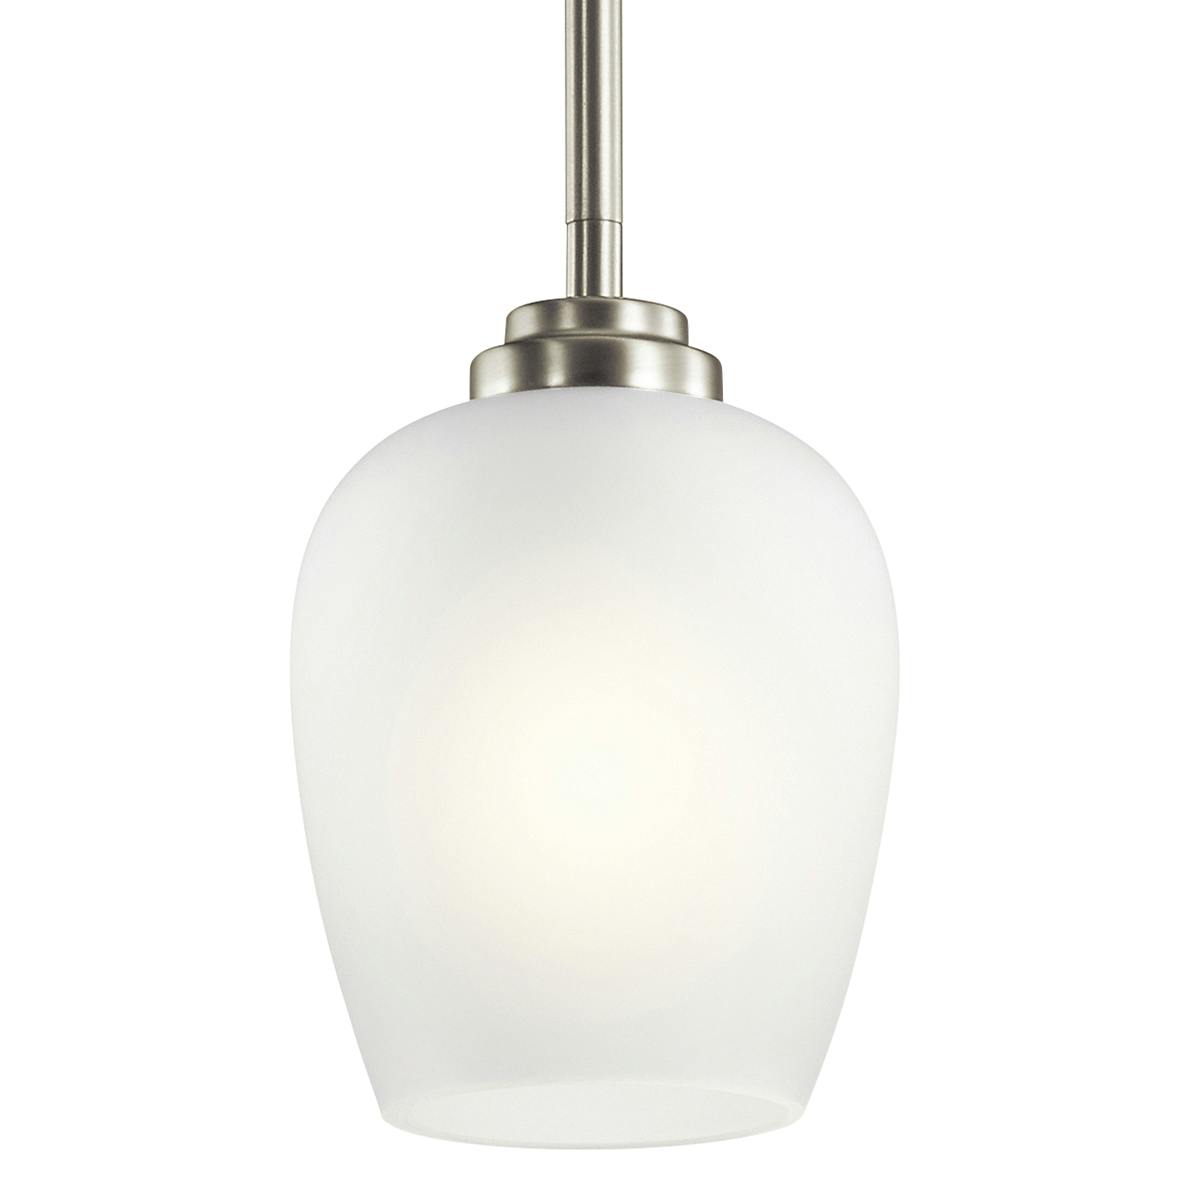 Close up view of the Valserrano 1 Light Mini Pendant Nickel on a white background